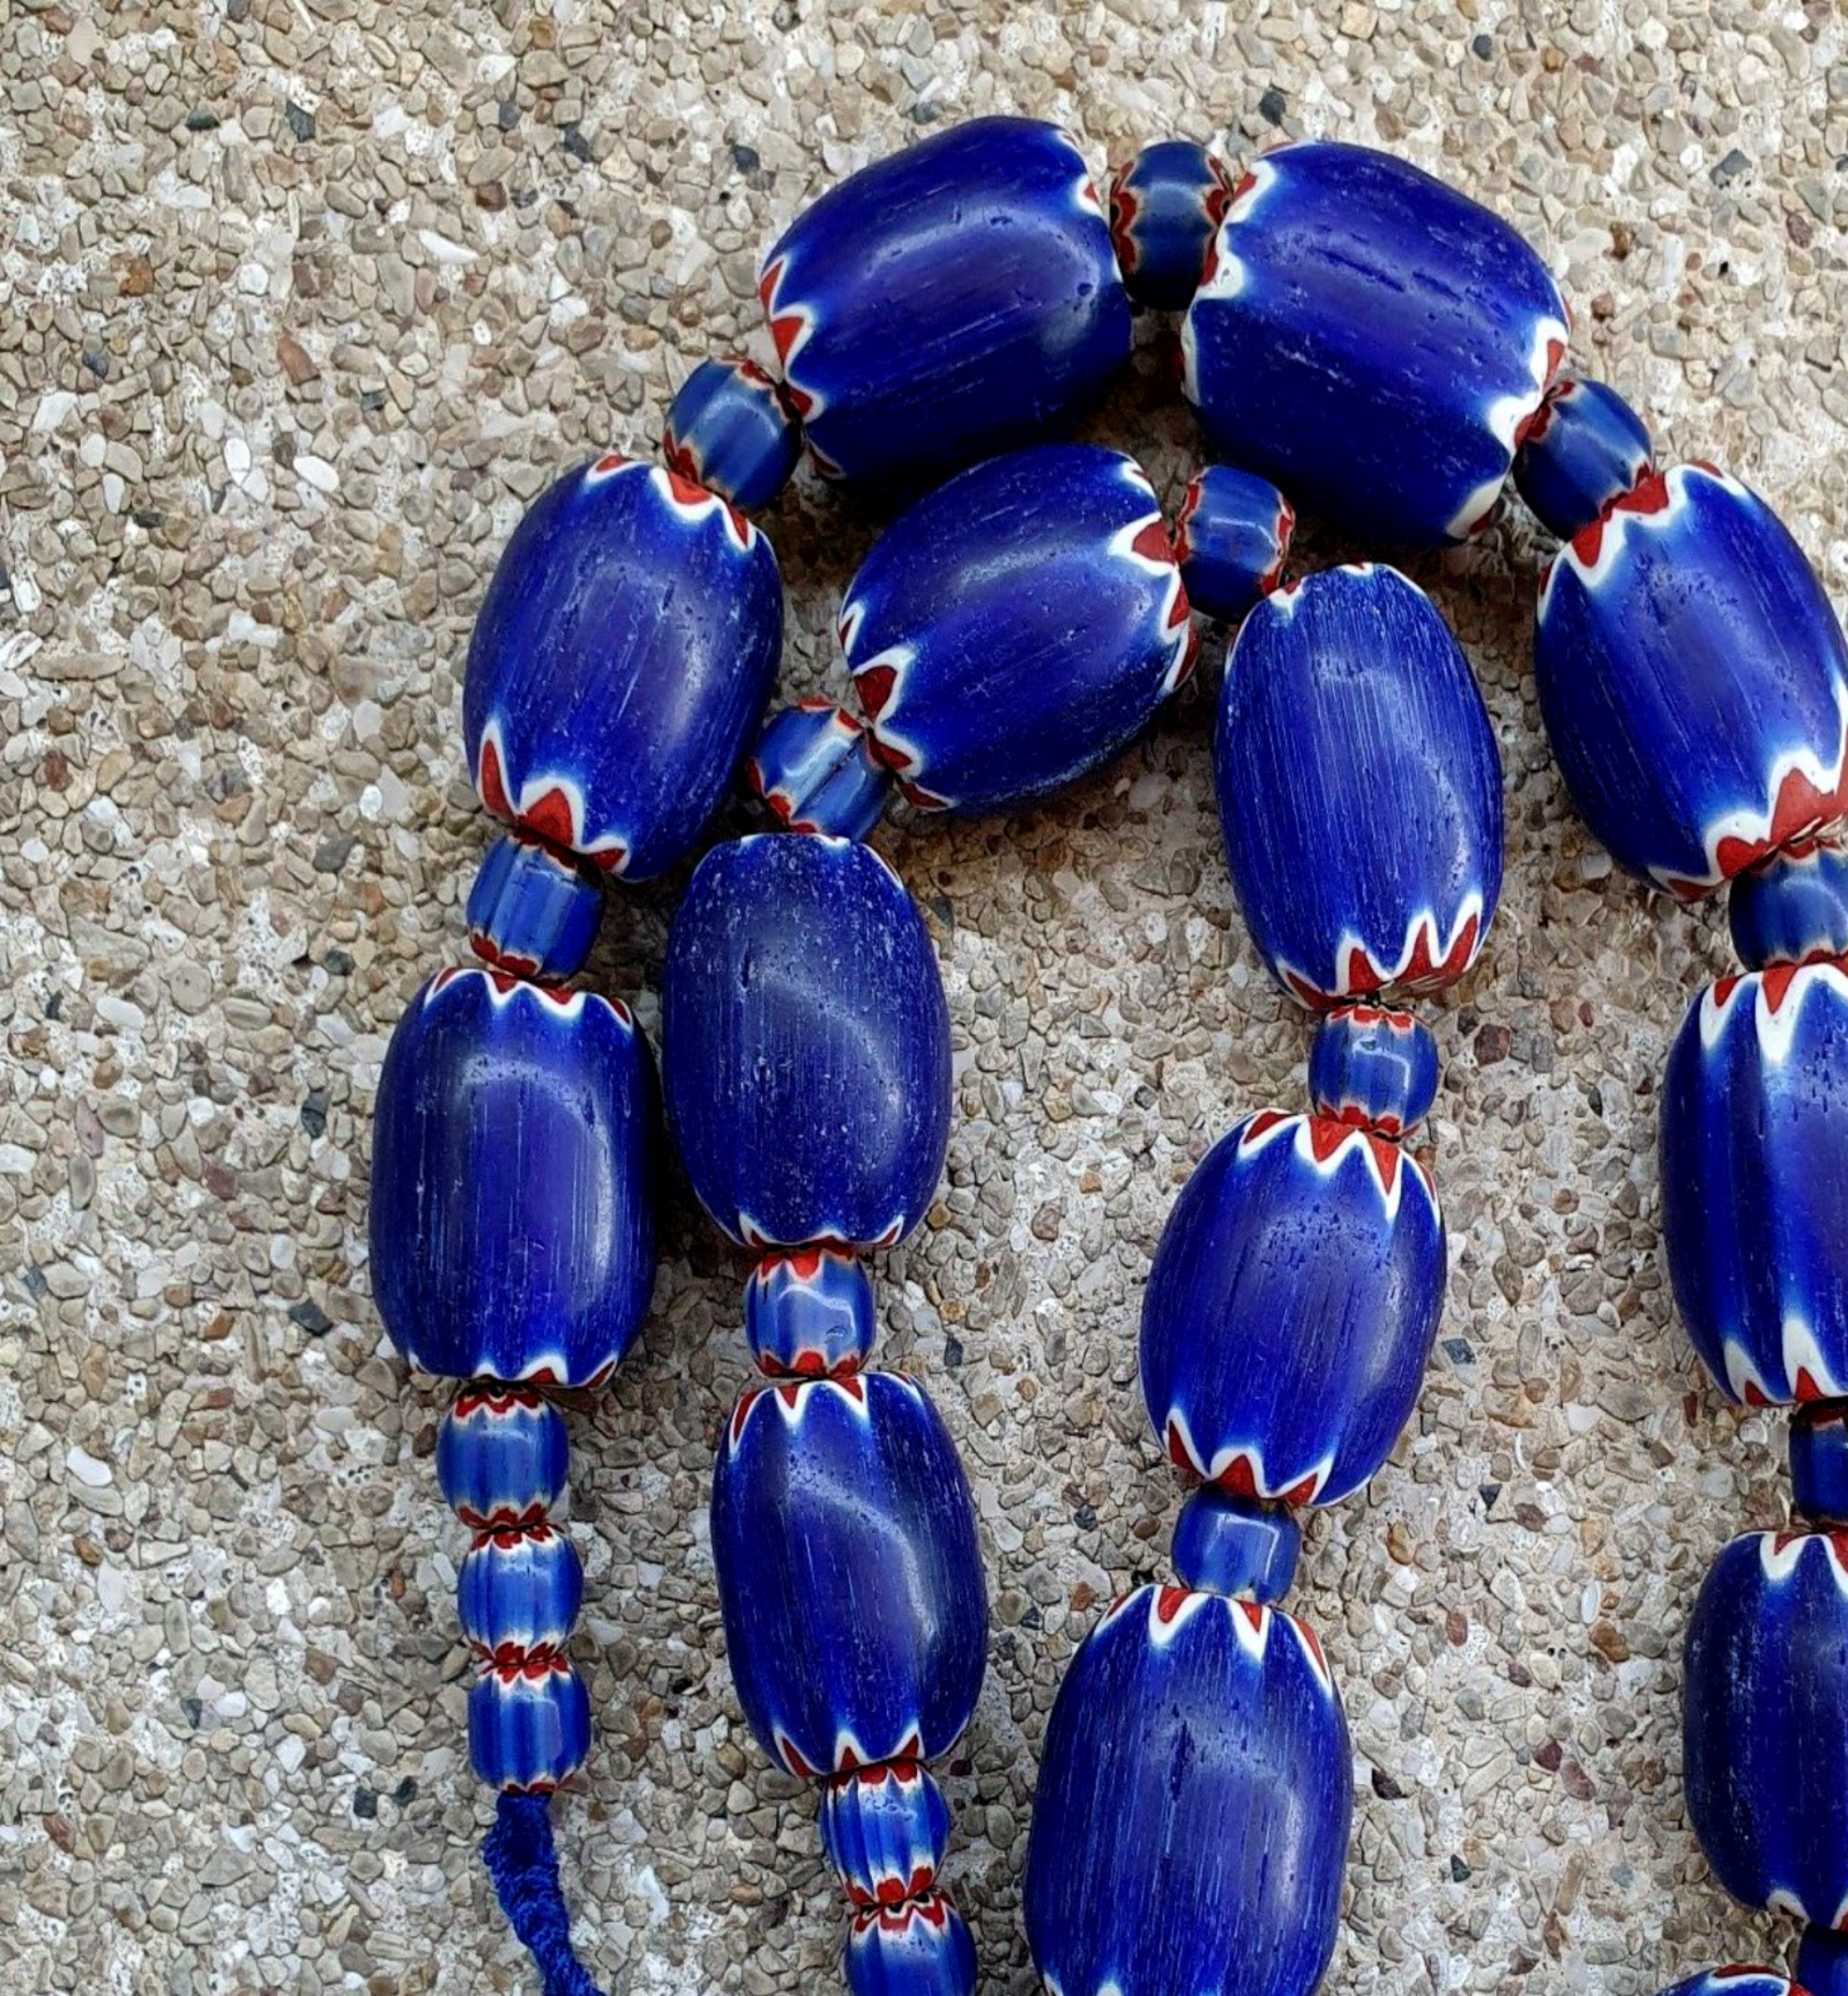 "Venetian style Blue Chevron Glass Beads Big Size Long Strand. A striking long strand of large, blue chevron-patterned glass beads in a classic Venetian style, featuring a bold and vibrant design with a sleek, glossy finish."